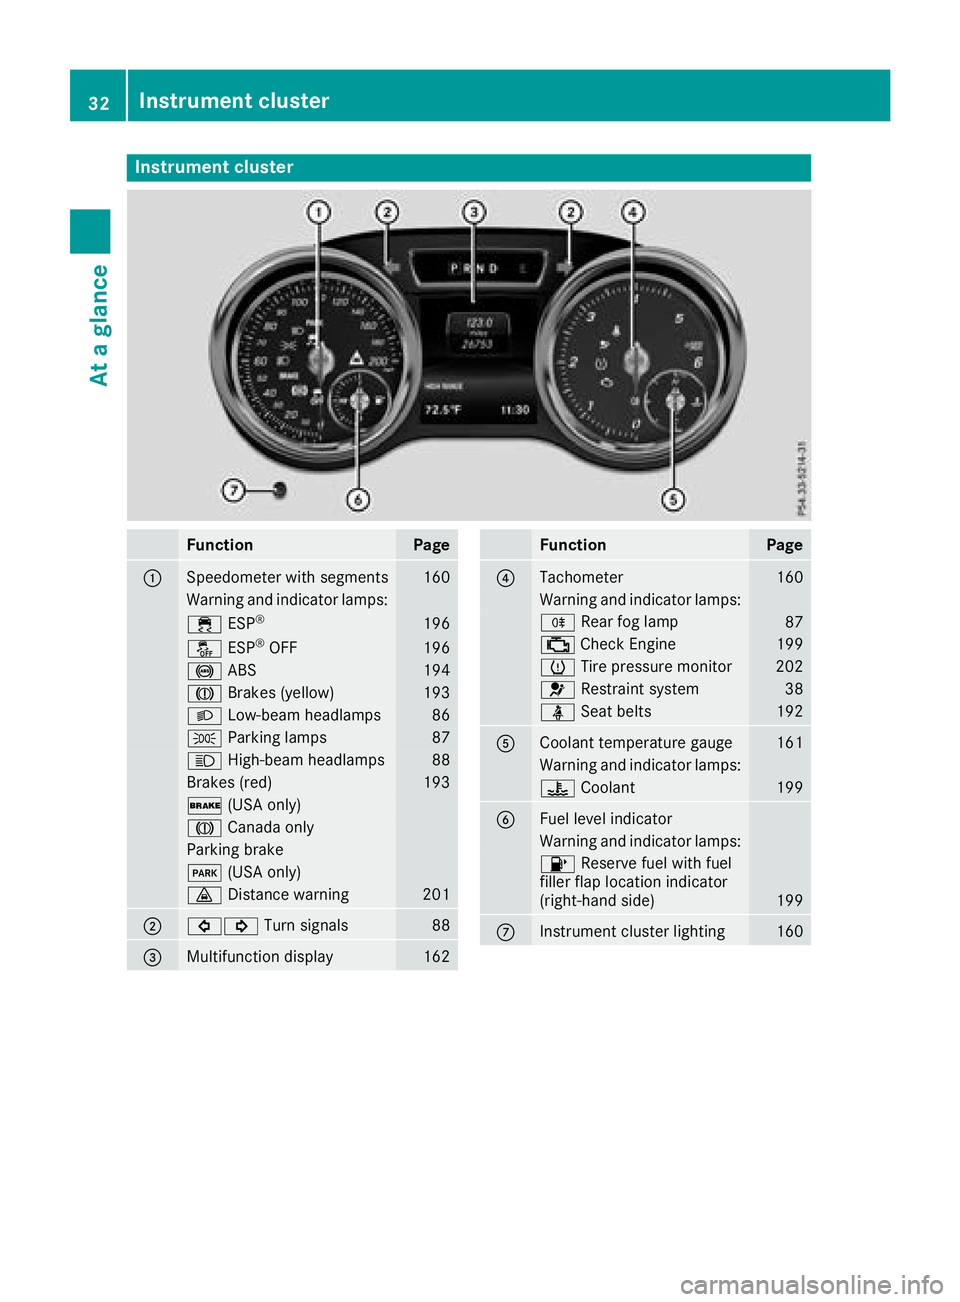 MERCEDES-BENZ G-CLASS 2018  Owners Manual Instrument cluster
FunctionPage
:Speedometer wit hsegments16 0
Warning and indicator lamps:
÷ ESP®19 6
å ESP®OF F196
! ABS194
J Brakes(yellow)19 3
L Low-beam headlamps86
TParking lamp s87
KHigh-be